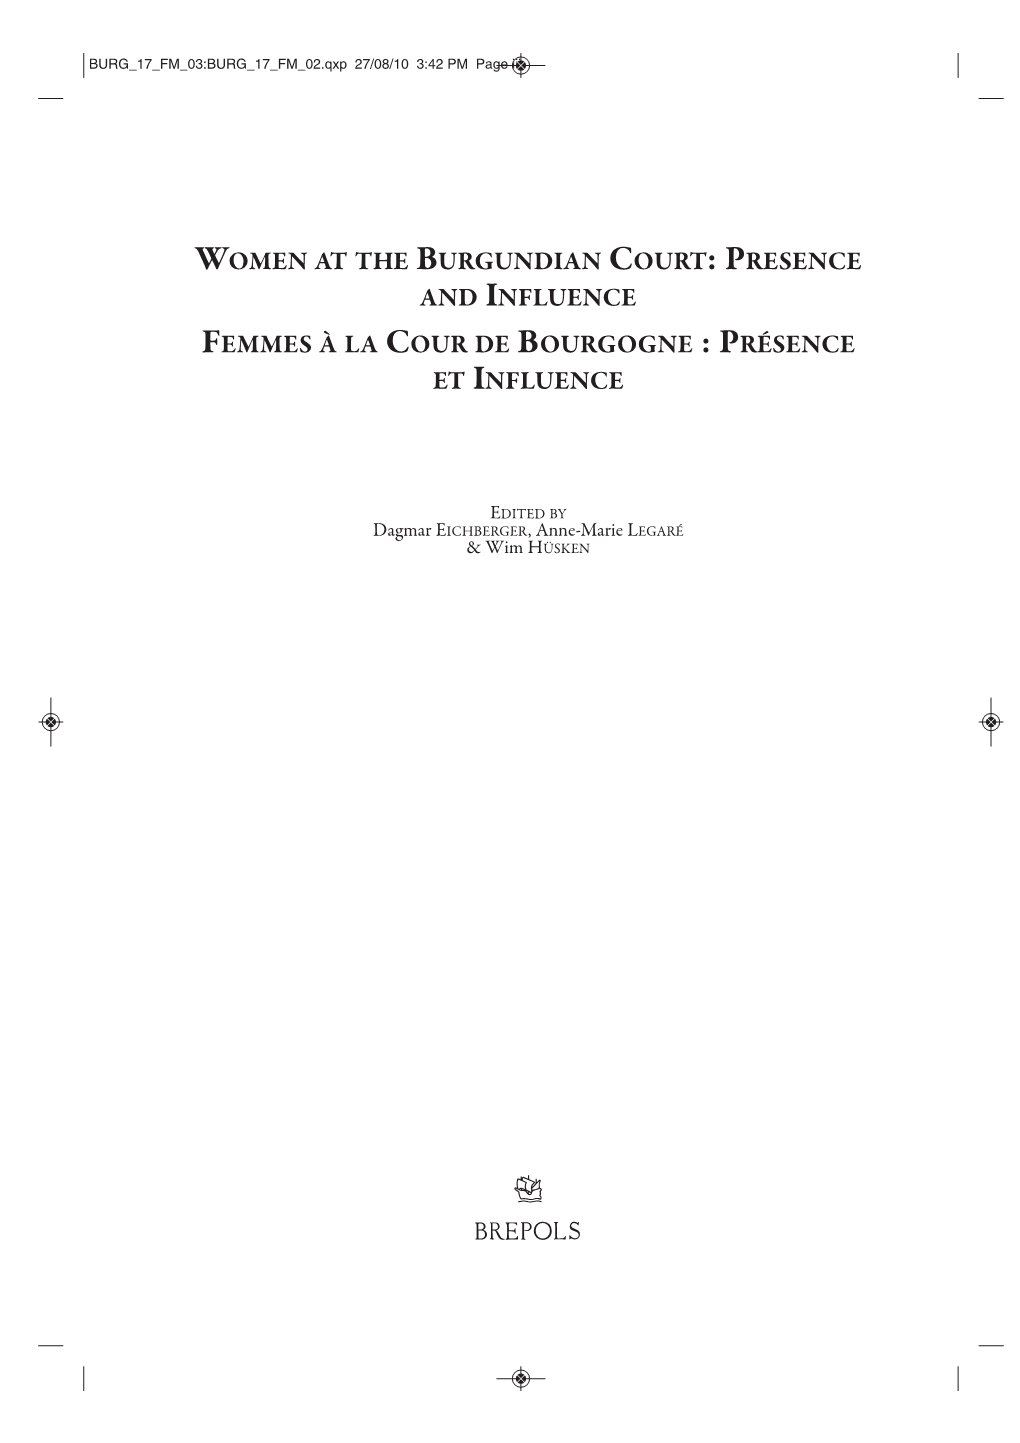 Presence and Influence of Women at the Burgundian Court